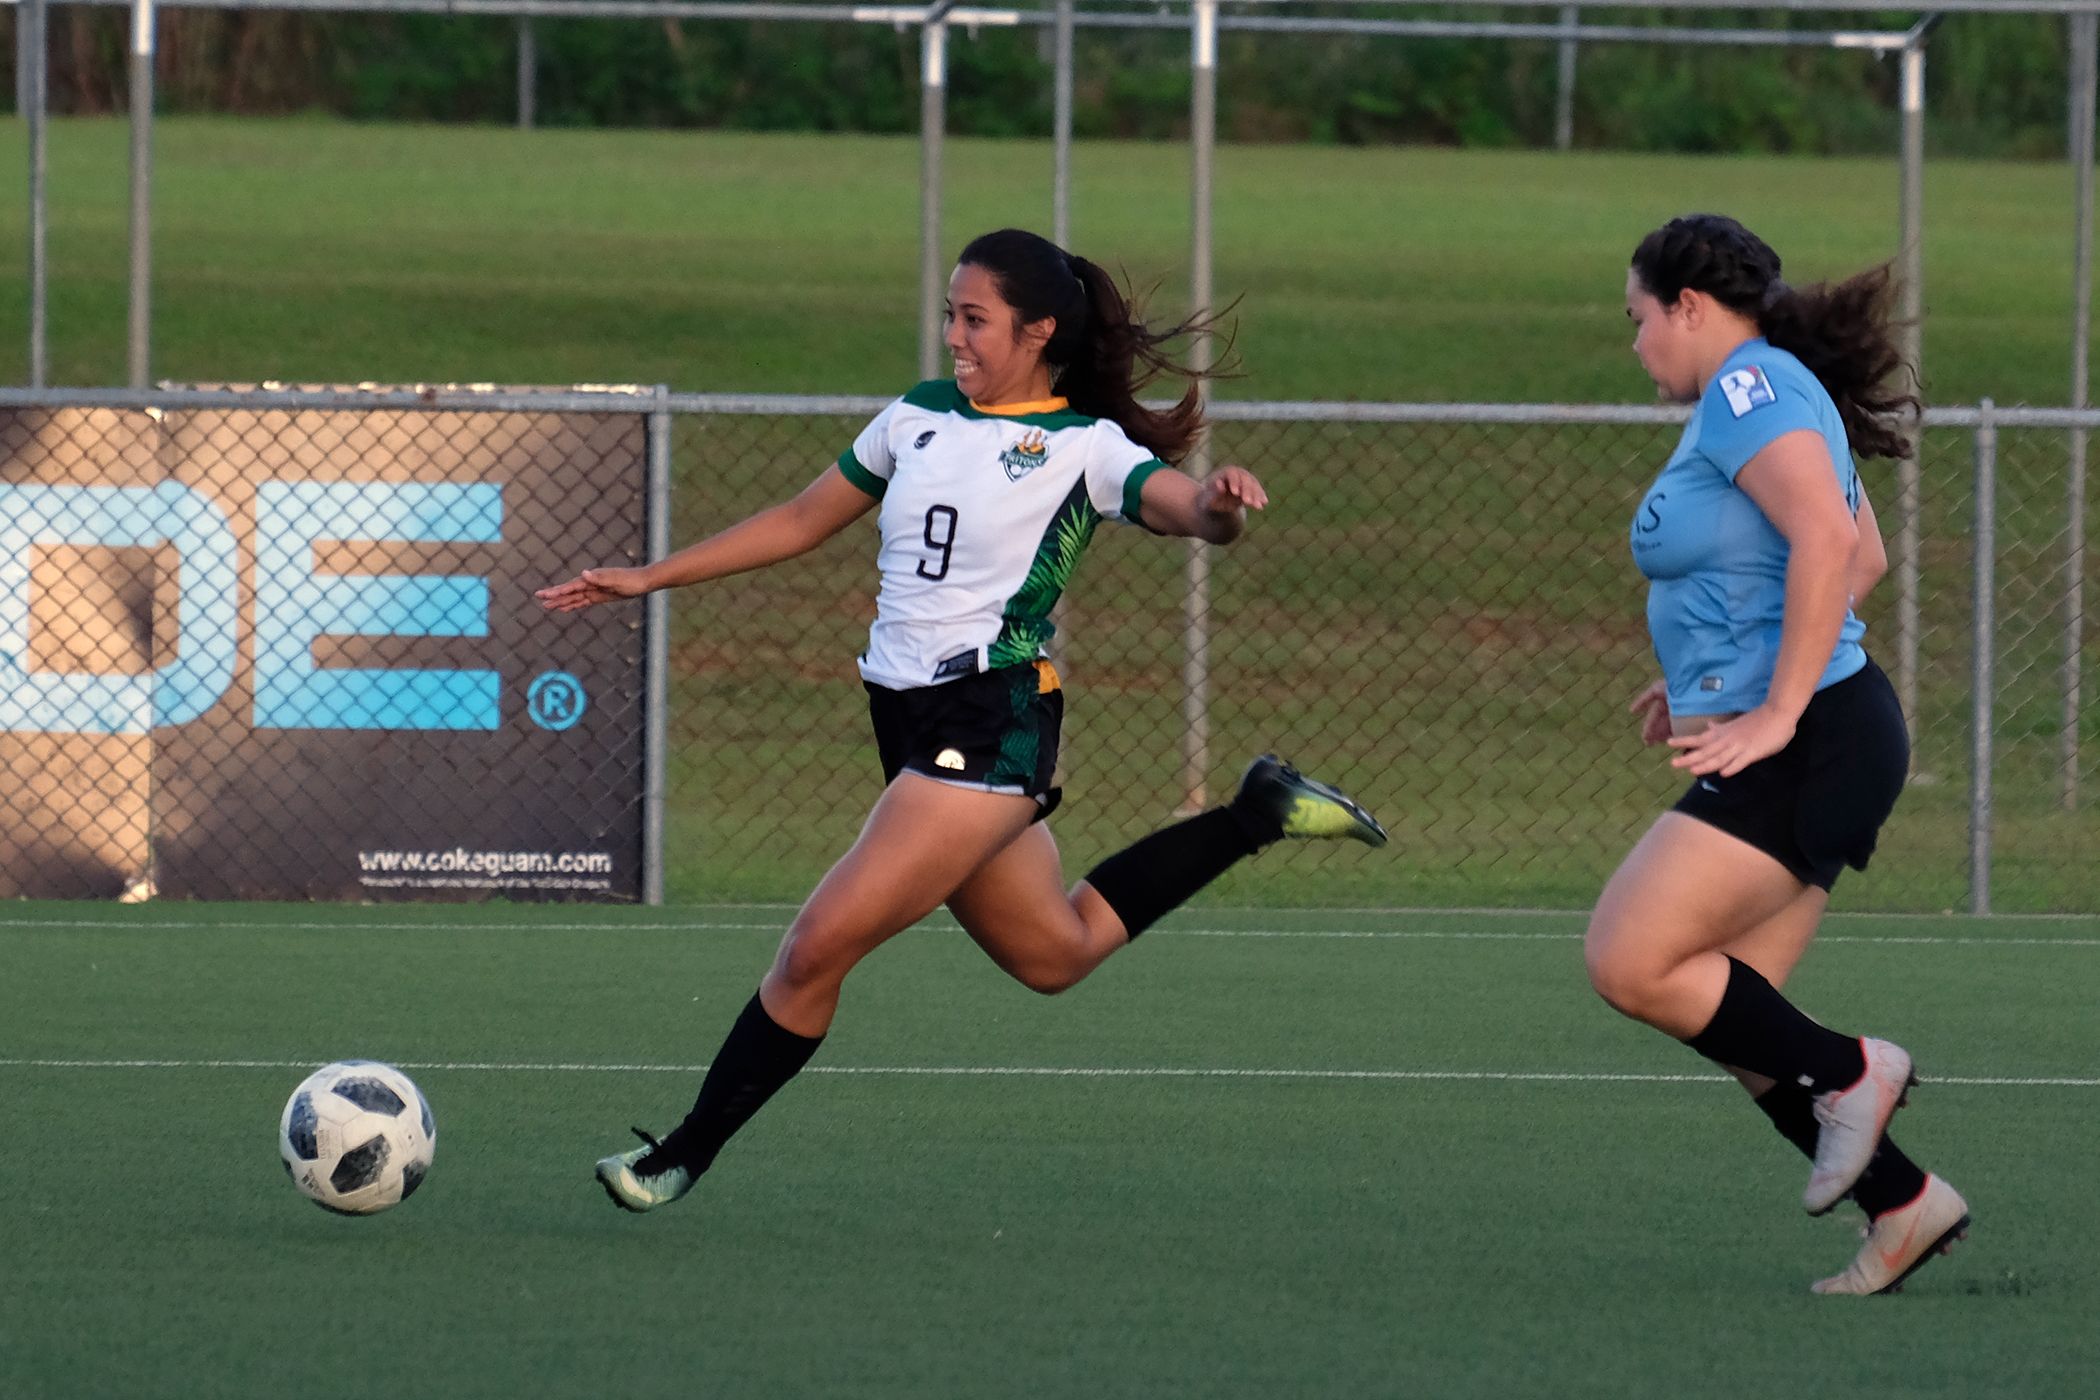 UOG Women's Soccer goes to 4-0 in victory over Sidekicks  The University of Guam Women's Soccer Team kept its undefeated streak going with a 4-0 victory over the Venue Sidekicks on Nov. 18 in the Guam Football Association's Bud Light Amateur Women's League at the GFA National Training Center.   The Sidekicks came out strong and dominated the first few minutes of the first half, keeping the ball in their offensive end, but the Lady Tritons began to shift the ball to their offensive end of the field as the game moved forward.   The UOG defense began to solidify during the match as the Sidekicks could never break past the UOG defensive line to get a shot on the goal, and the Tritons began to move past the Sidekicks' defense for several fast break attempts on goal.   The Lady Tritons opened the scoring at about the 20-minute mark and led 1-0 at halftime and then scored three goals in the second half. Elisha Benavente scored three times for the Lady Tritons, and Koholali’i M. Maertens added a single goal. Ariya Cruz dished out three assists.   UOG is now 4-0-0 this season and finishes the fanuchånan portion of the schedule at 5:30 p.m. next Sunday, Nov. 25, against the Venue Slay team. The Venue Slay was the Spring 2018 D2 Champions while UOG was the D2 Champions in the Spring and Fall of 2017. But Team Slay did defeat the Tritons twice in the regular season play during UOG's championship seasons while UOG defeated Team Slay each season for the championship. UOG did not field a team during Team Slay's championship season.   Photos by UOG Sport Photographer Victor Consaga